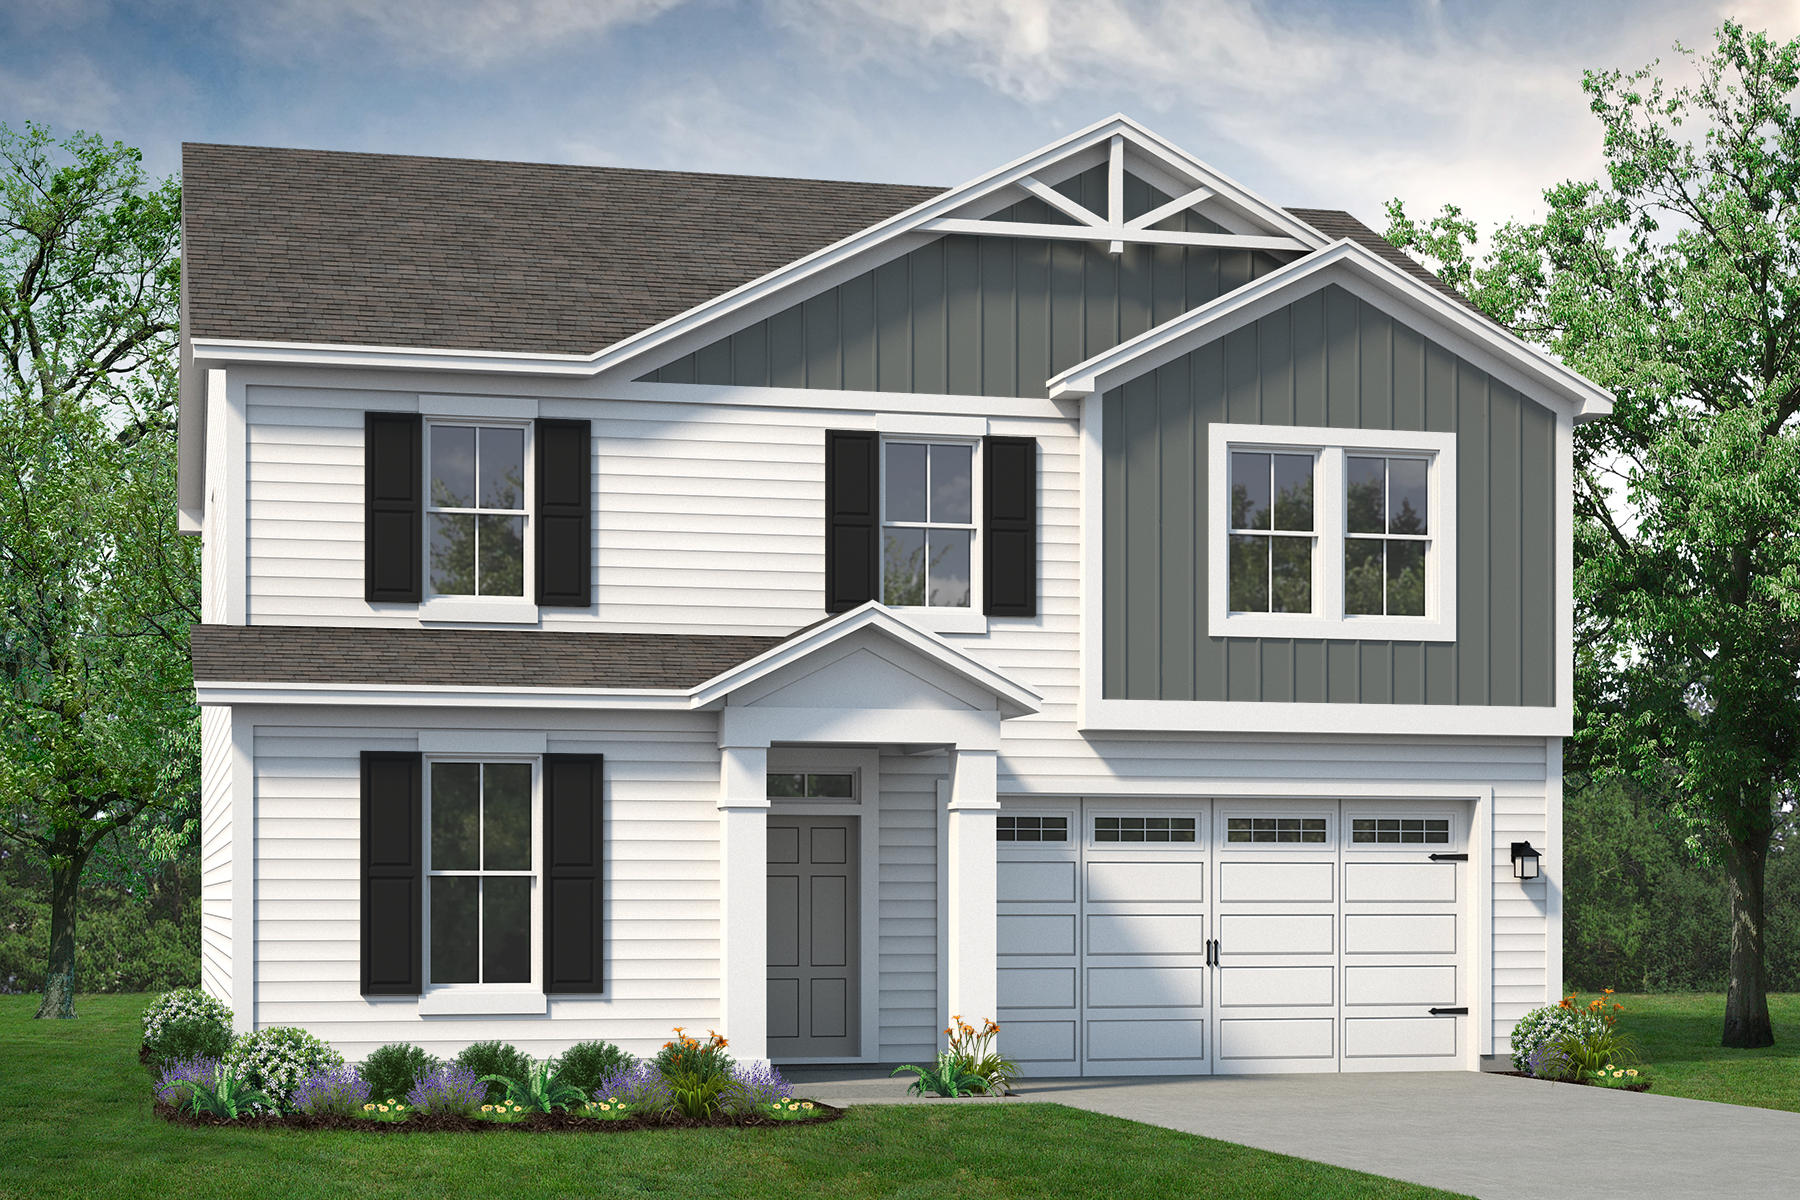 Elevation F. 2,427sf New Home in Lillington, NC